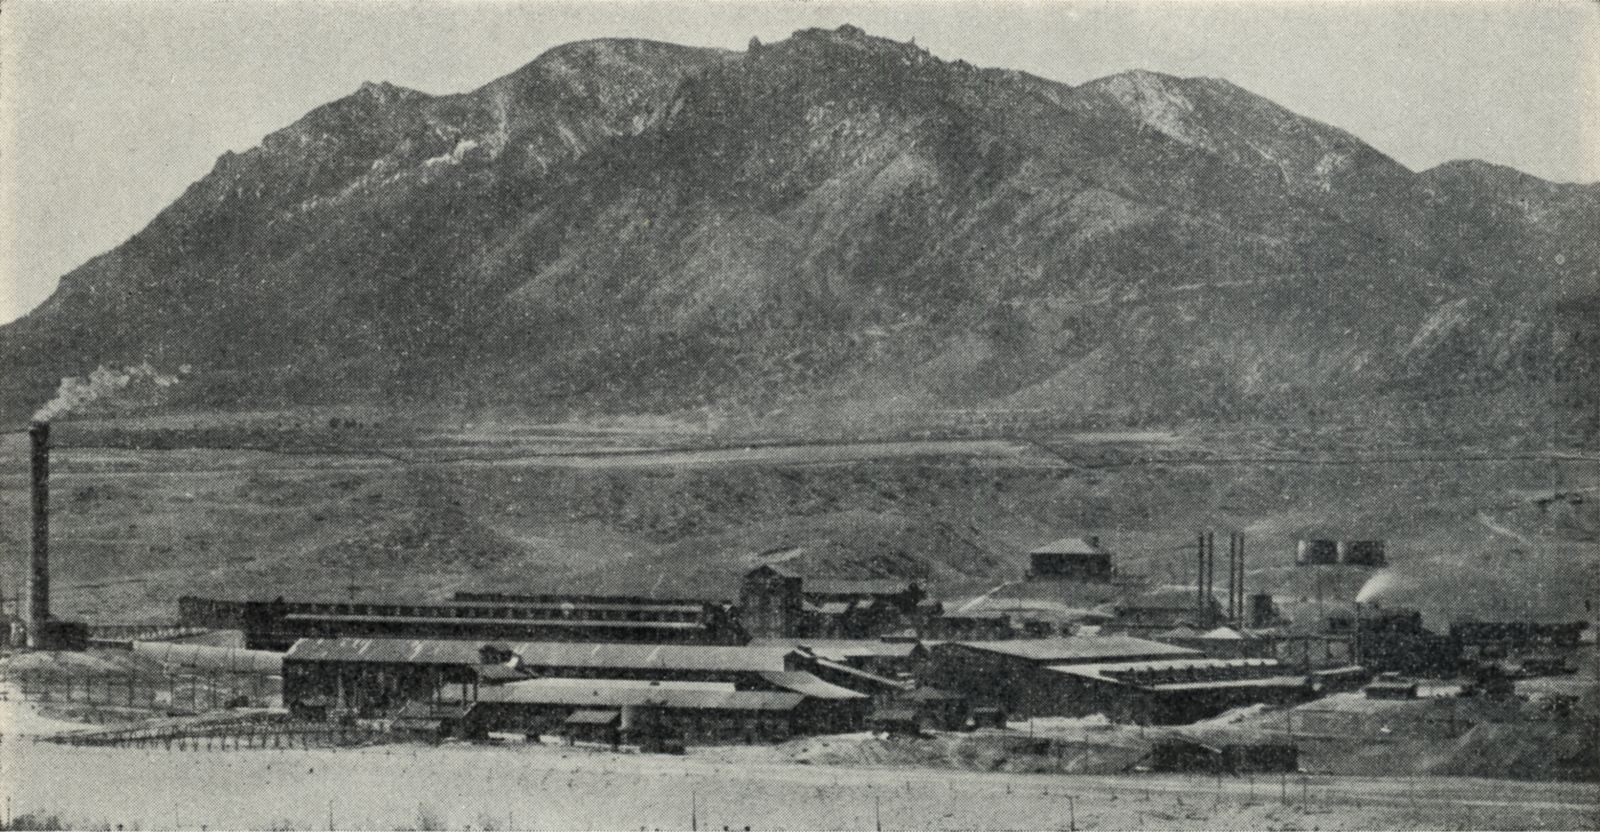 GOLDEN CYCLE MILL located at Colorado Springs. This is the largest Custom Gold Mill in operation today.